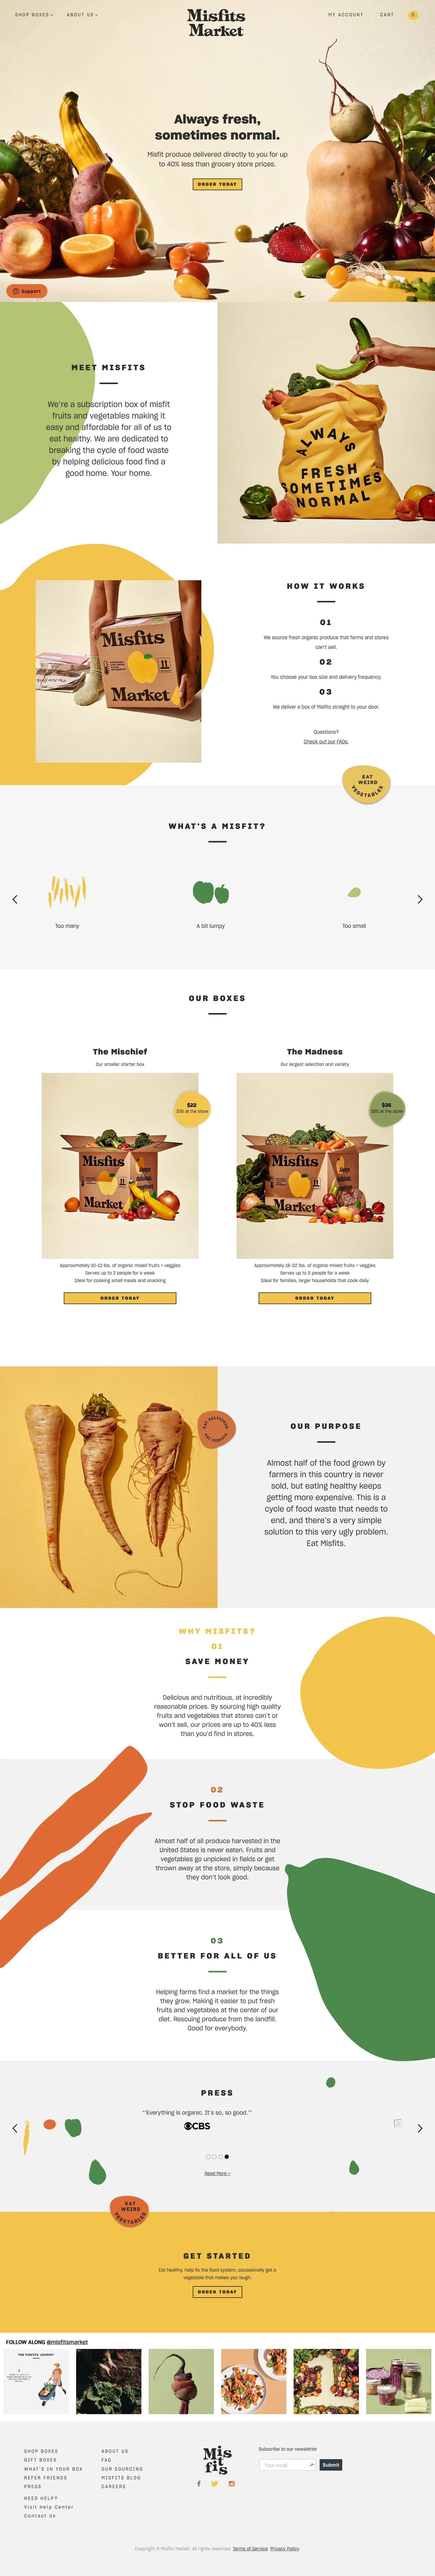 Misfits Market Landing Page Example: Misfits Market delivers ugly, but otherwise perfectly edible fruits and vegetables right to your door. Our mission is to combat food waste and provide affordable, healthy produce to the world.